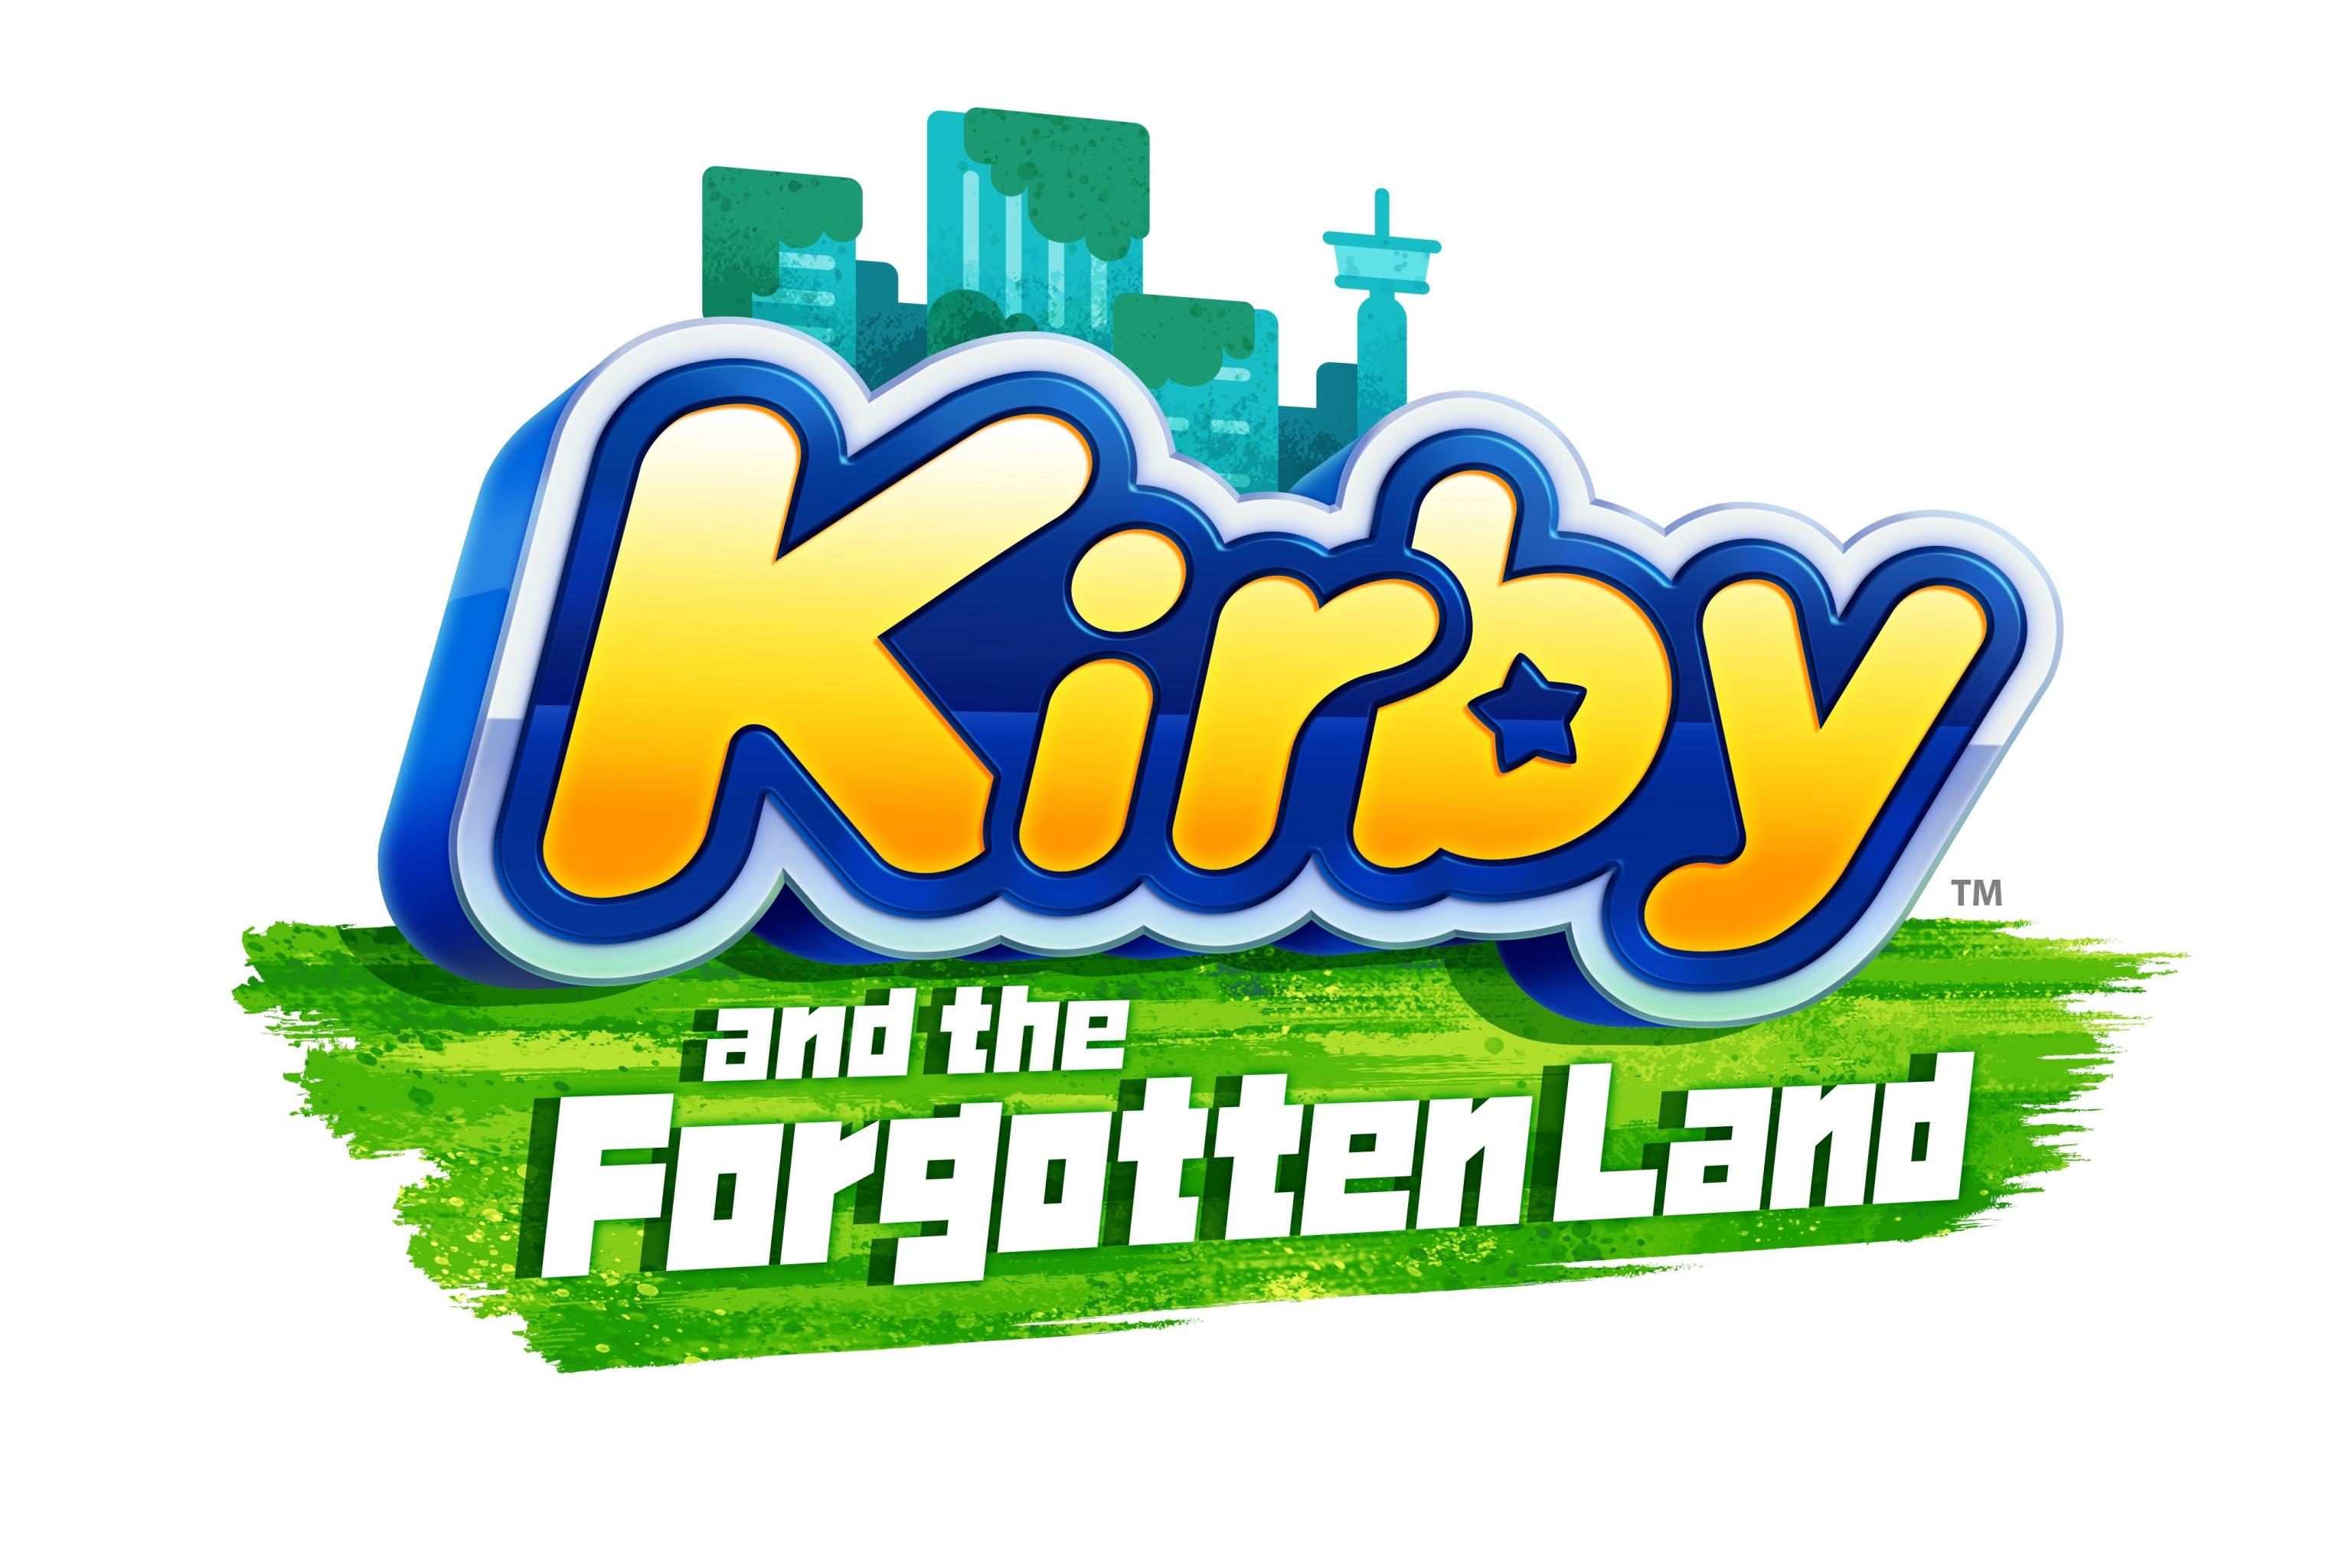 Kirby and the Forgotten Land goes down smooth like a Kirby game